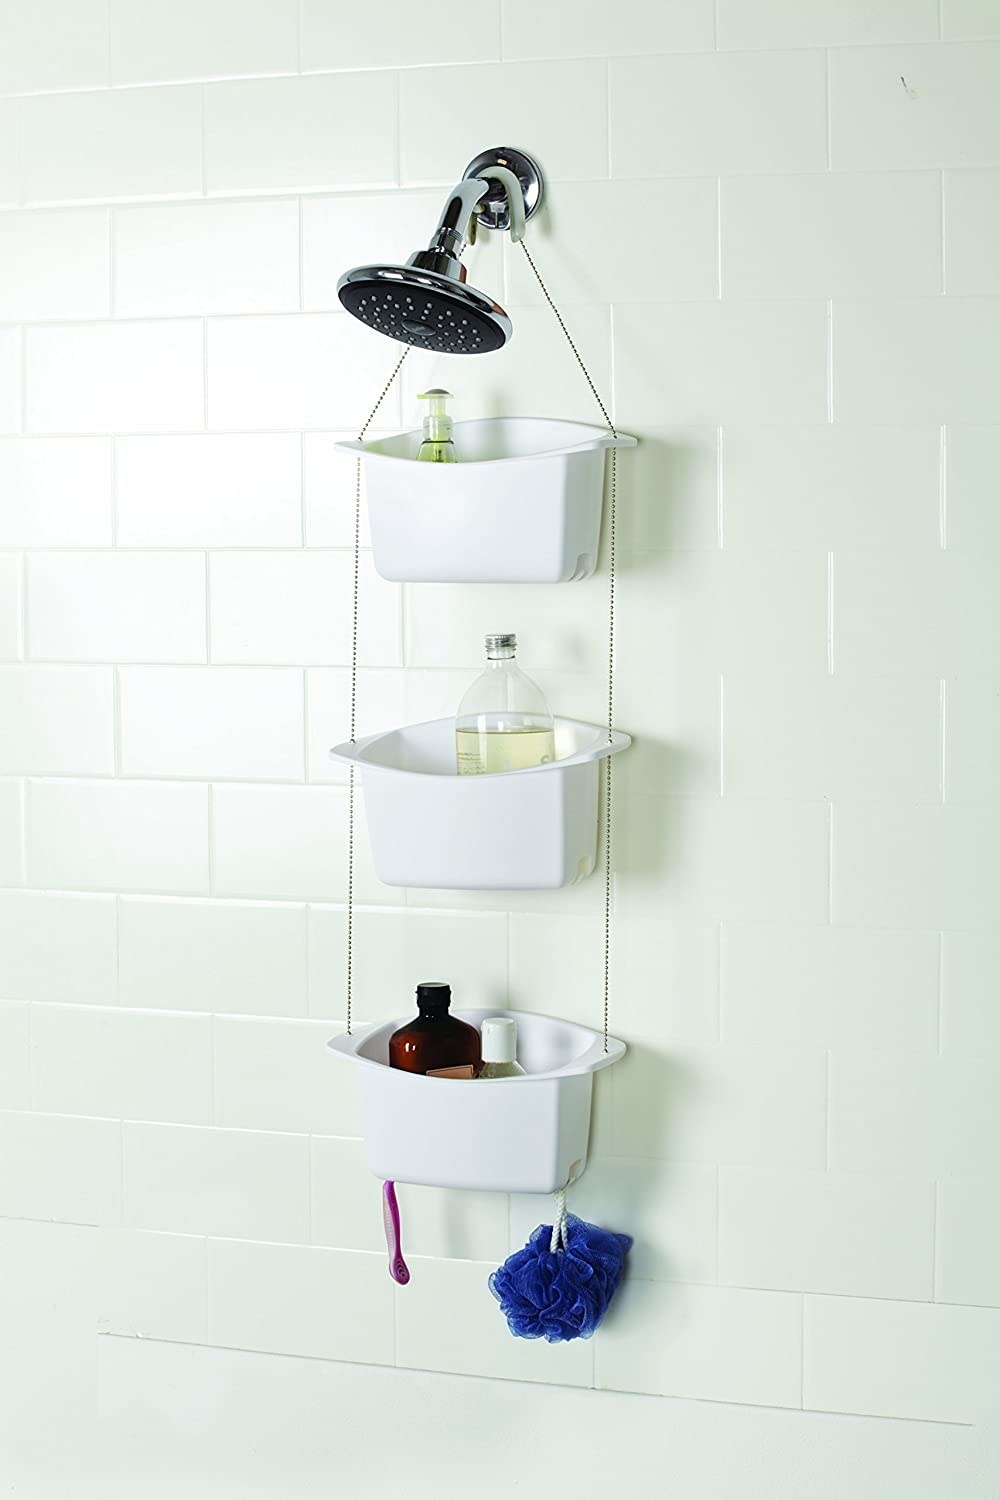 The shower caddy with three storage baskets hanging over the showerhead.